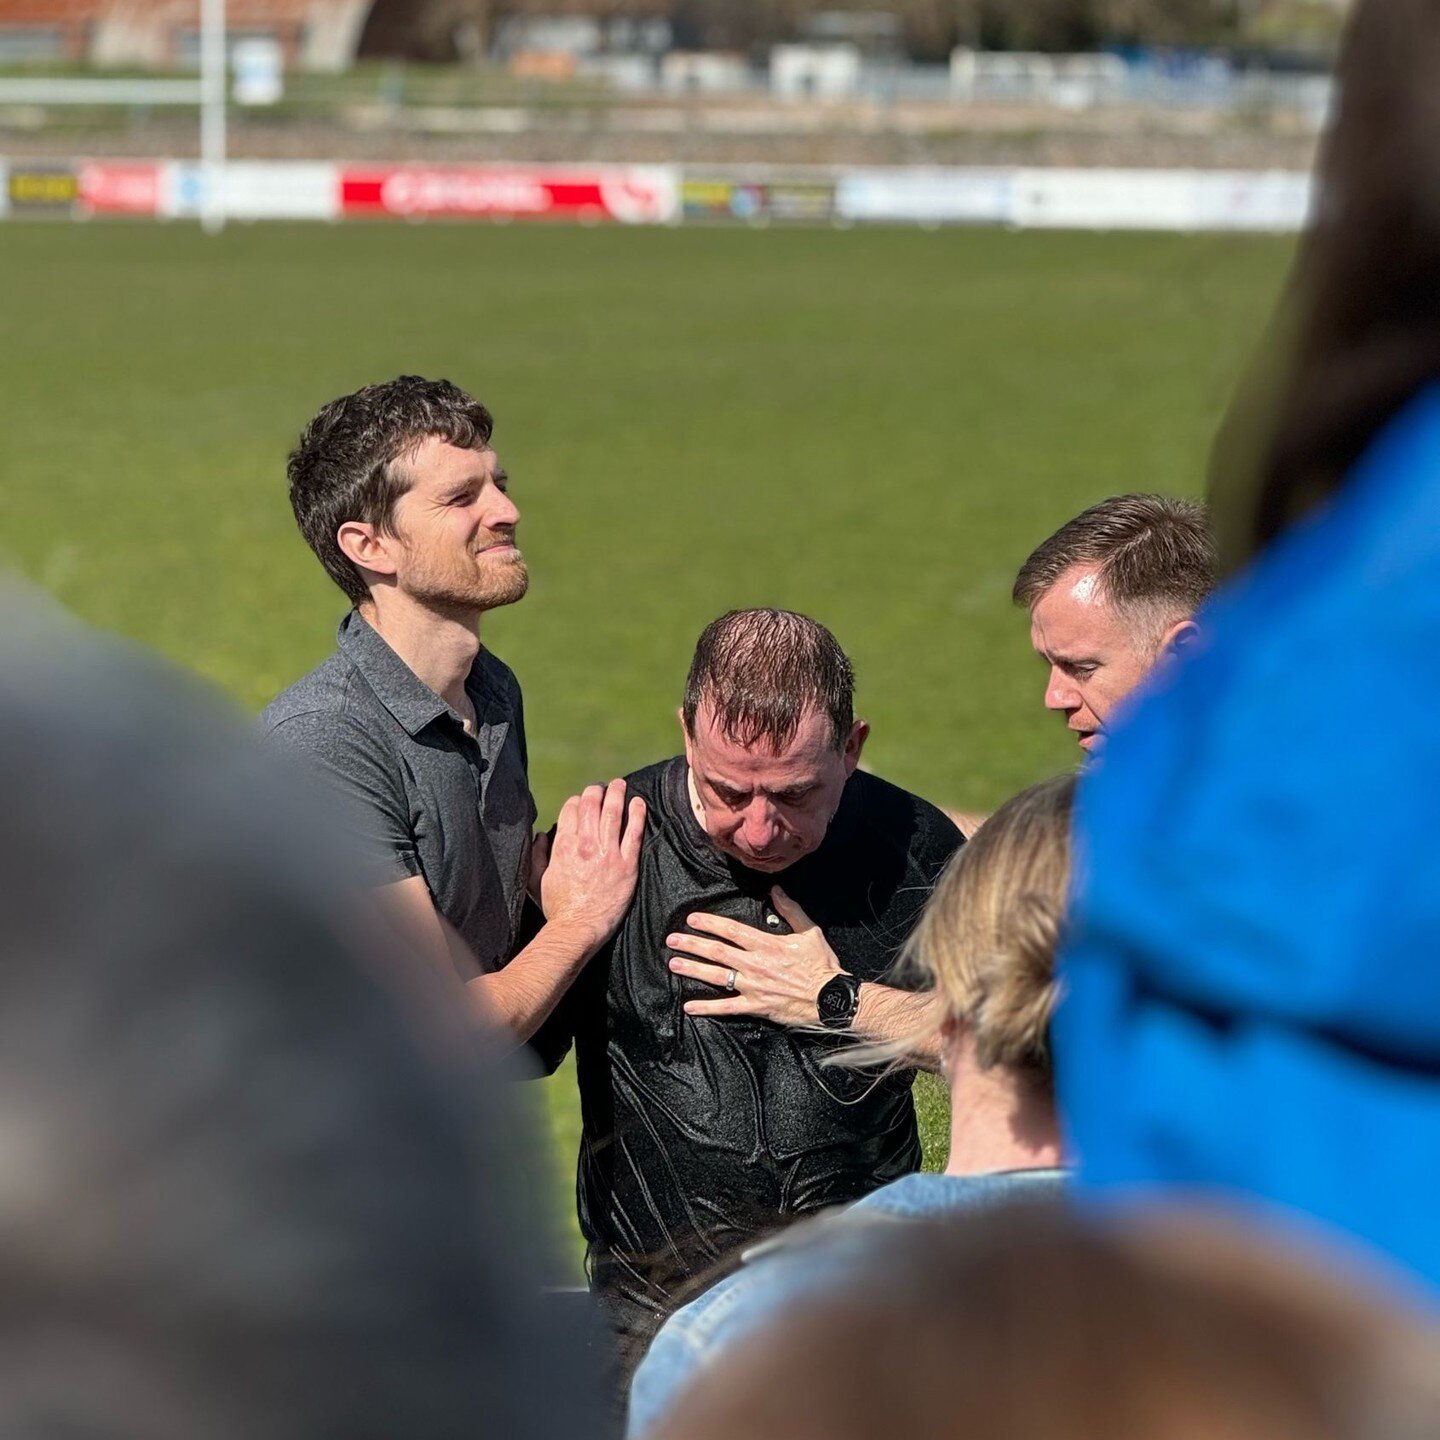 #EasterSunday We love it when people go public with their faith! It was so good to cheer everyone on, worship God together &amp; hear a great message from Simon Poyner which you can catch up on by heading to the resources section on our website. #Jes